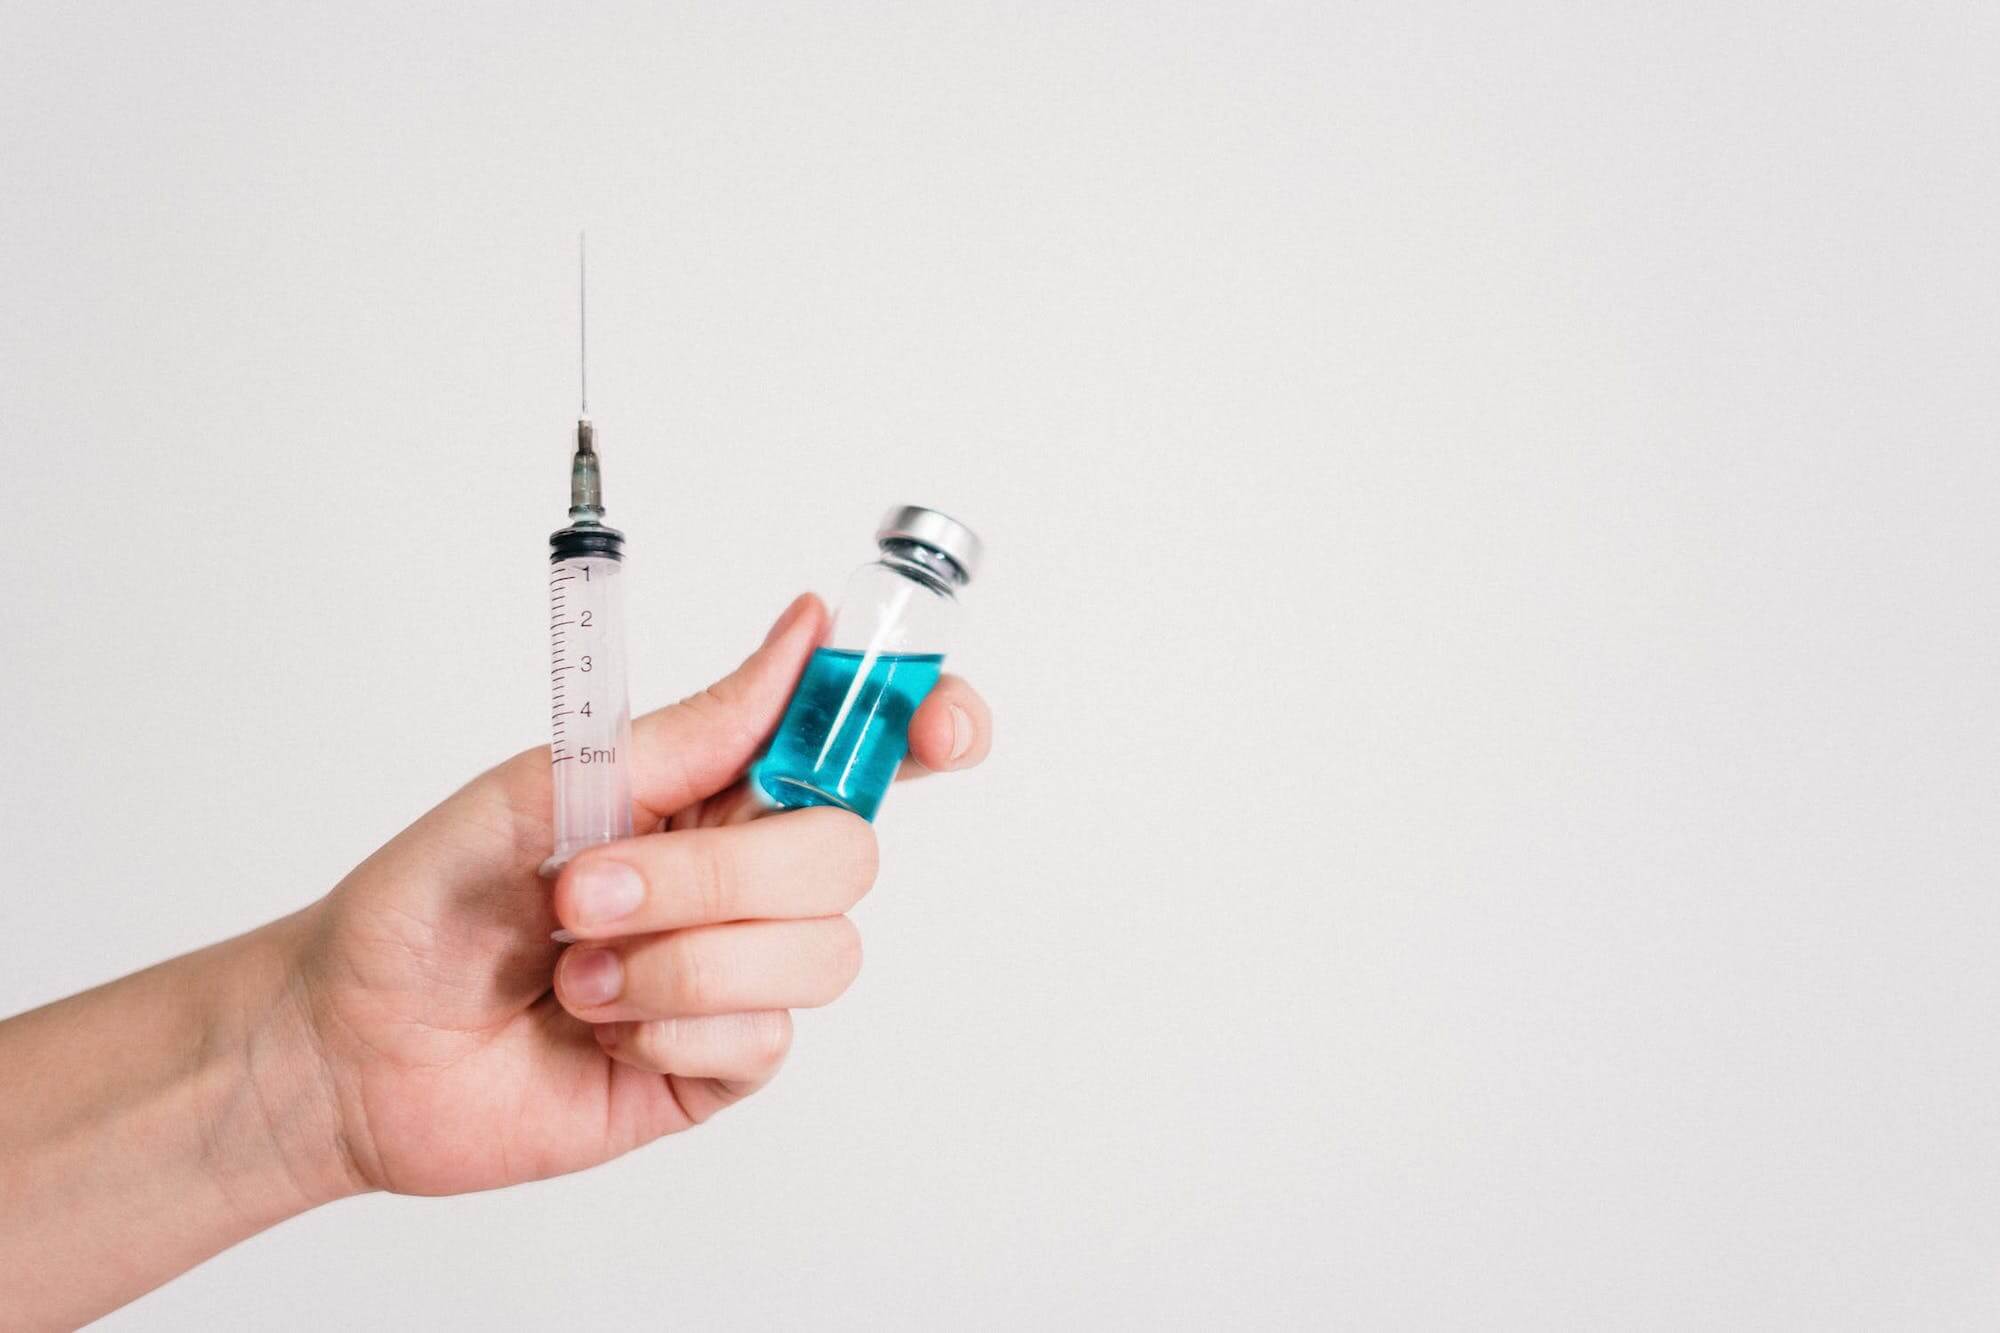 Covid-19: What to do when staff don’t want to be vaccinated